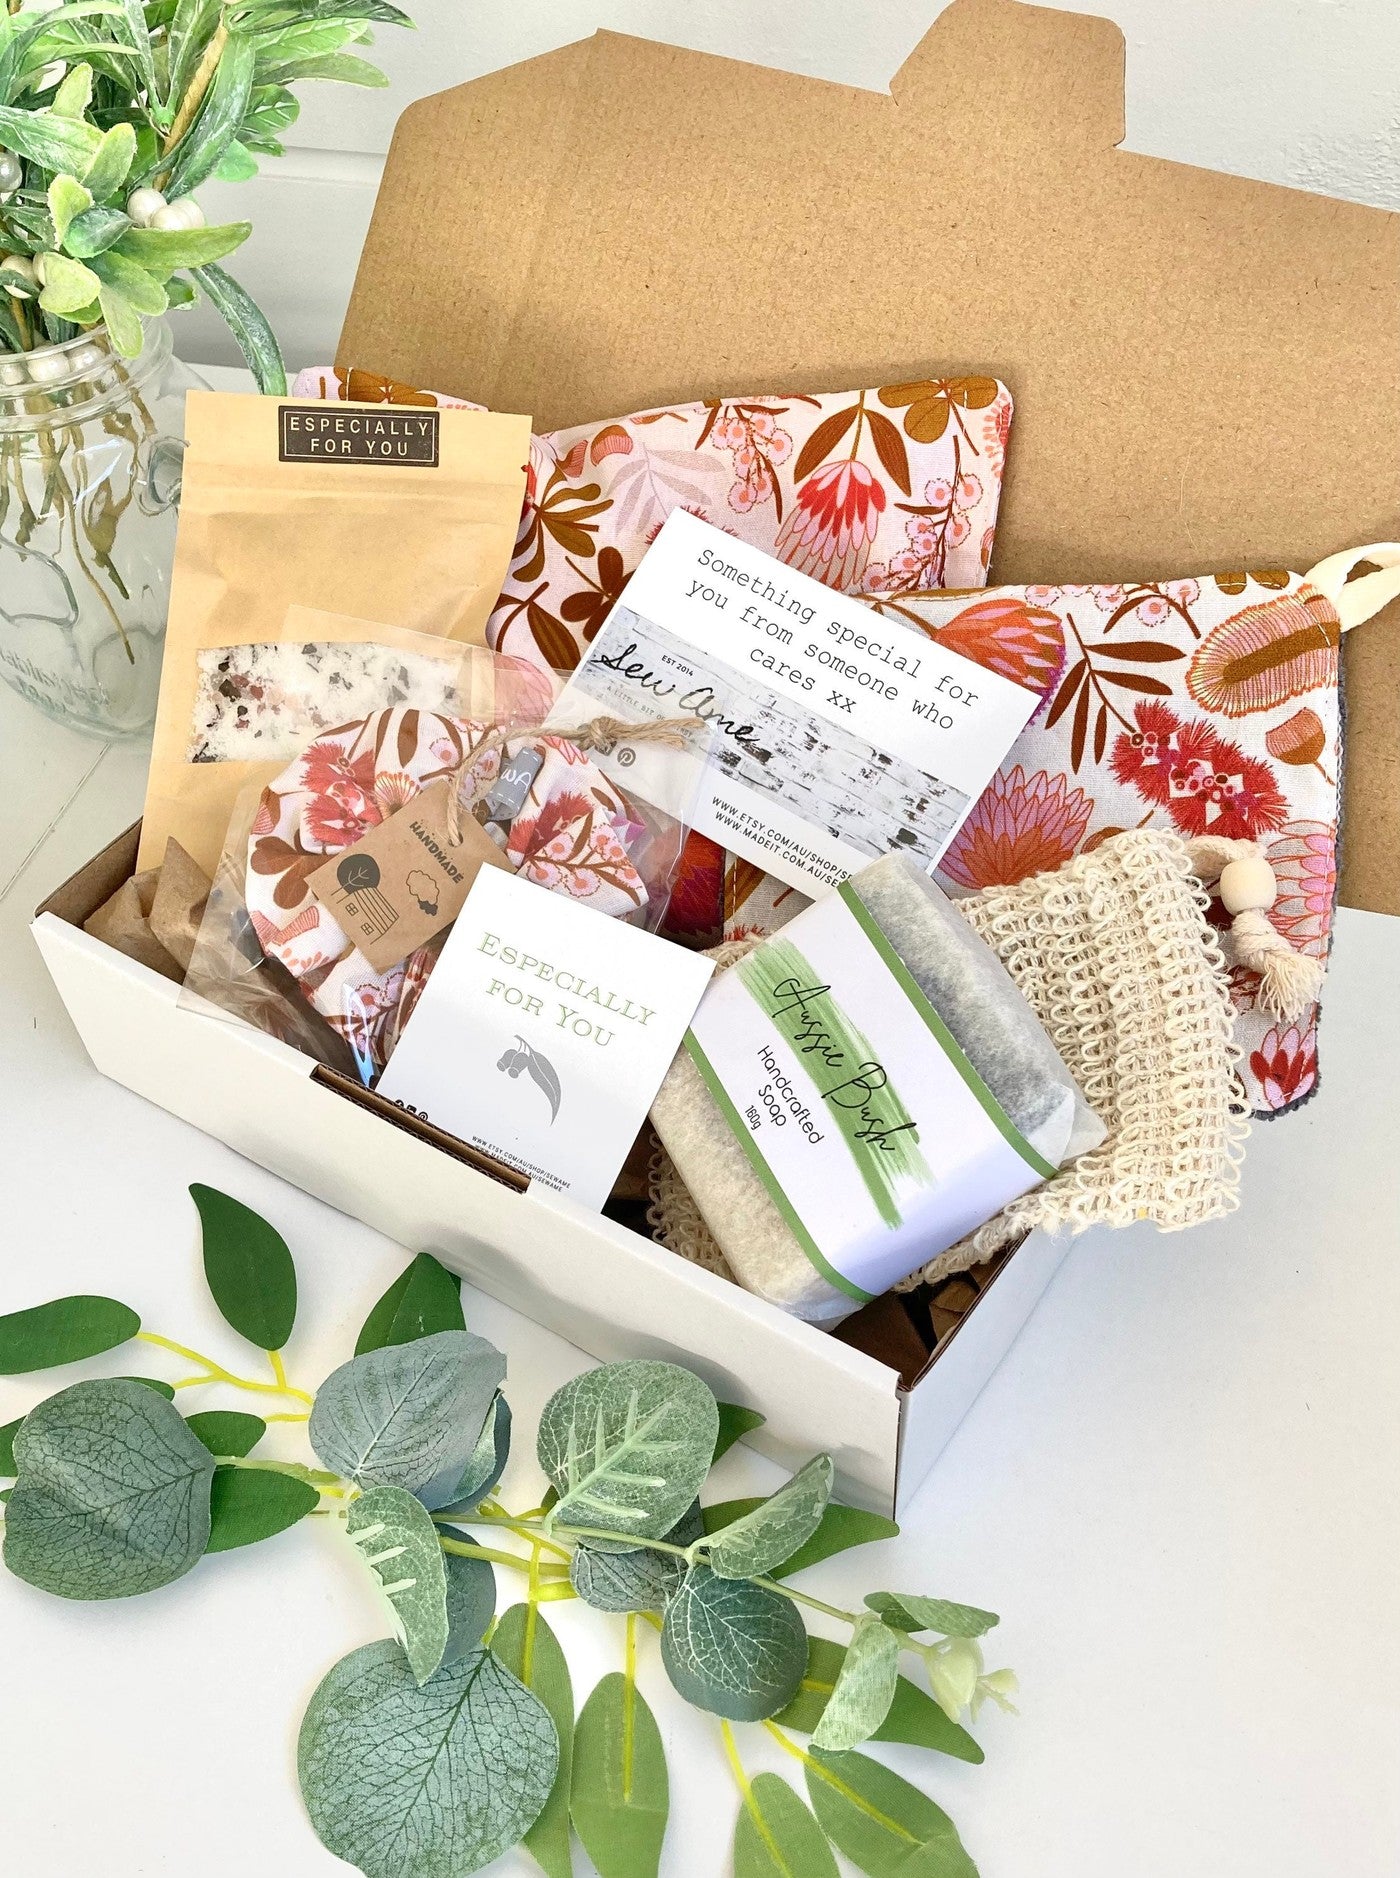 New Mum Gift, Beauty Pamper Hamper, Spa and Care Pack in Native Flowers Fabric